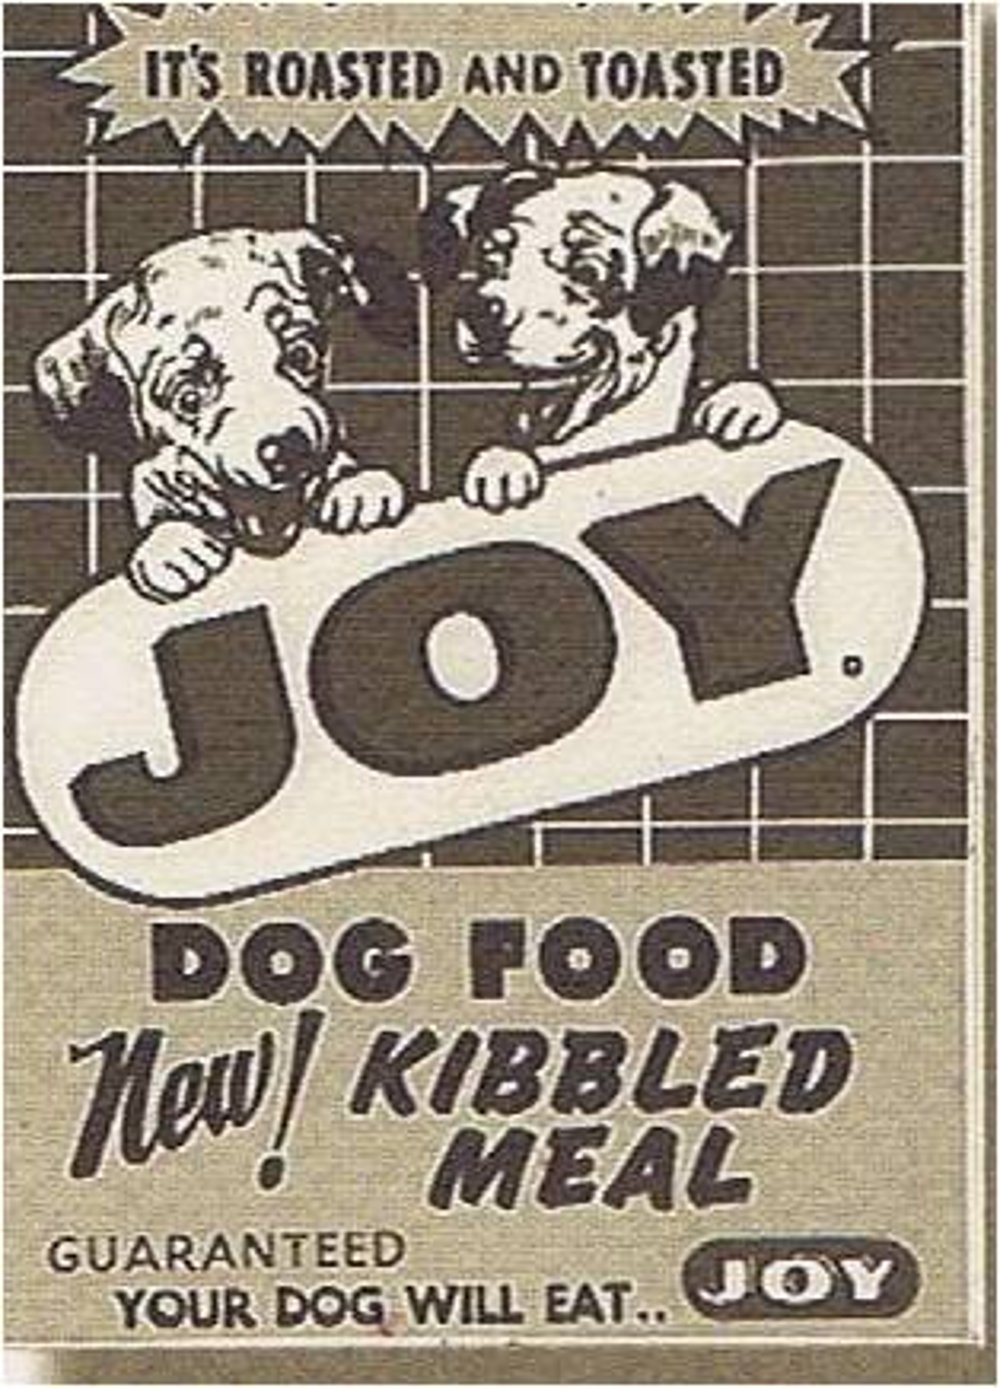 Joy Dog Food is formulated to meet the nutritional needs of active, hard working dogs.